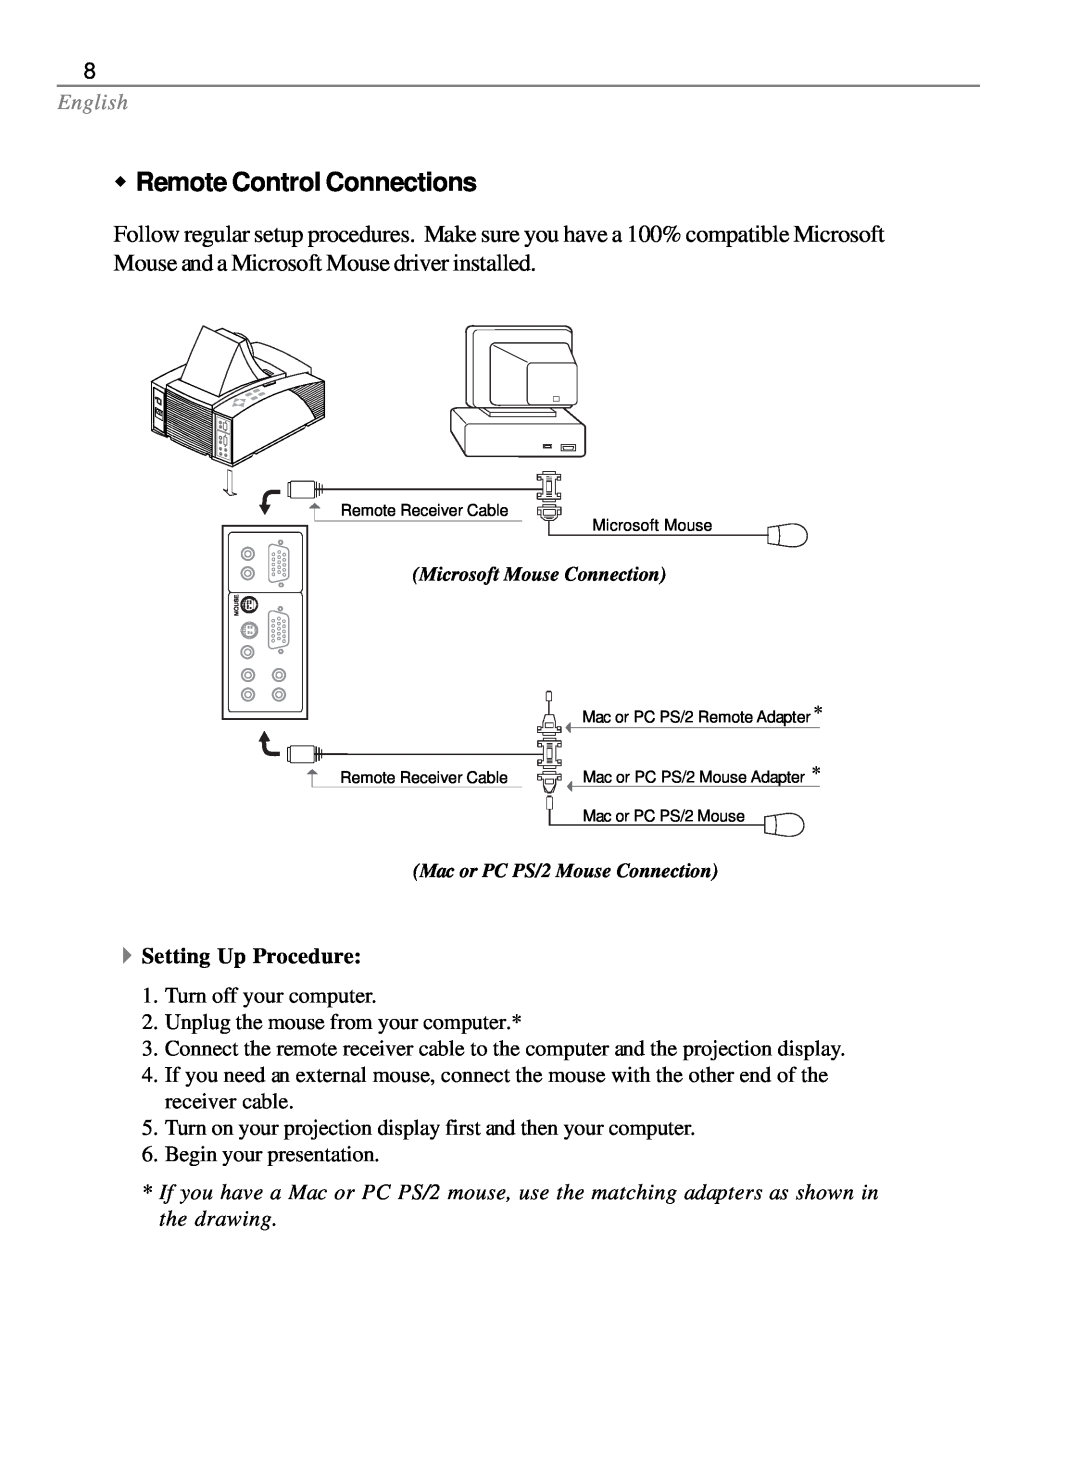 Optoma Technology EP585 specifications w Remote Control Connections, Setting Up Procedure, English 